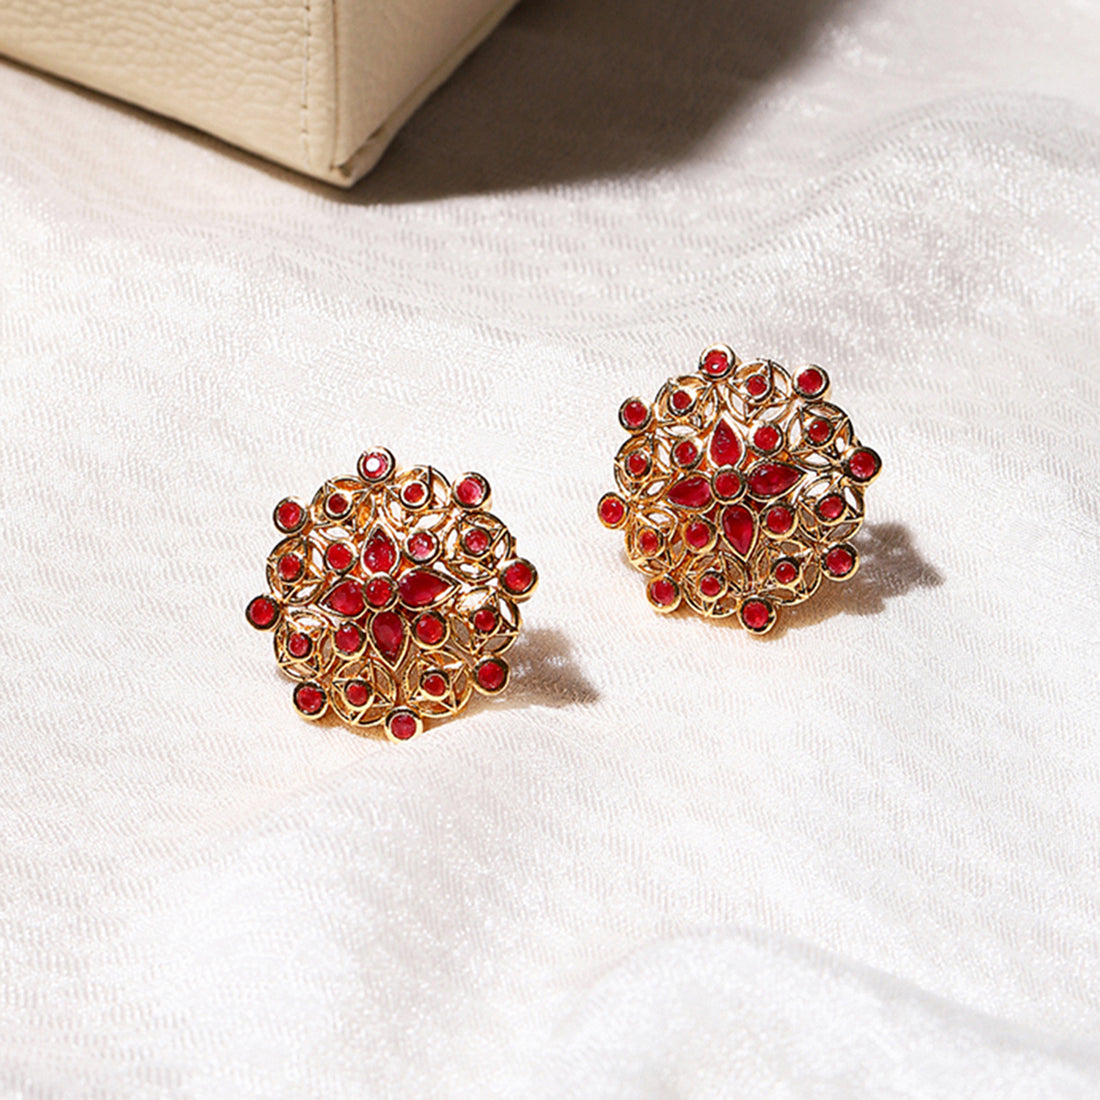 Buy Red Crystal Studs, Crystal Studs, Red Studs, Red Stone Studs Online in  India - Etsy